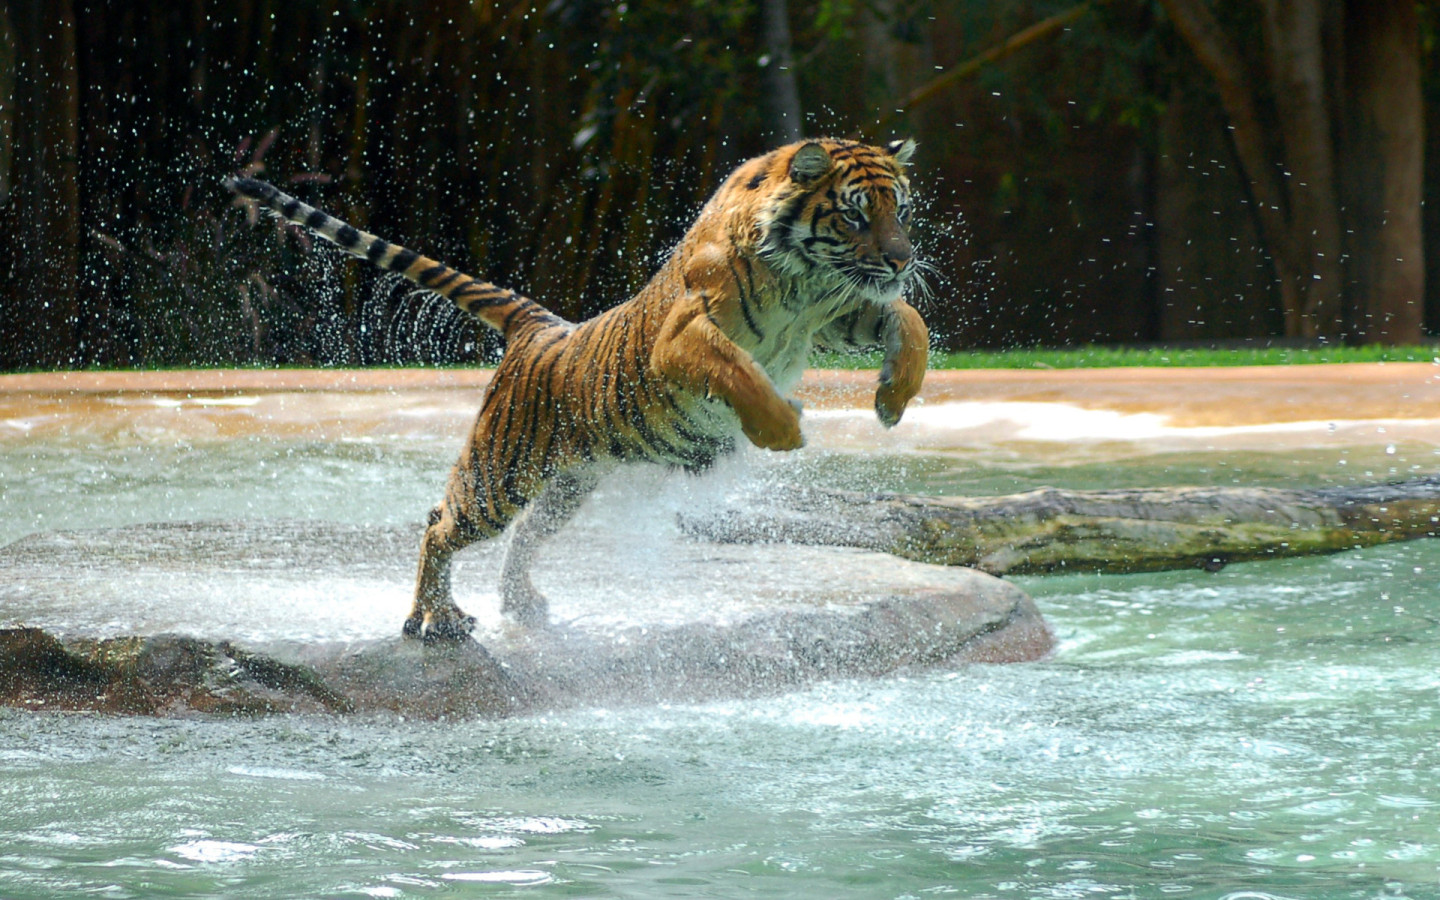 Tiger in a jump